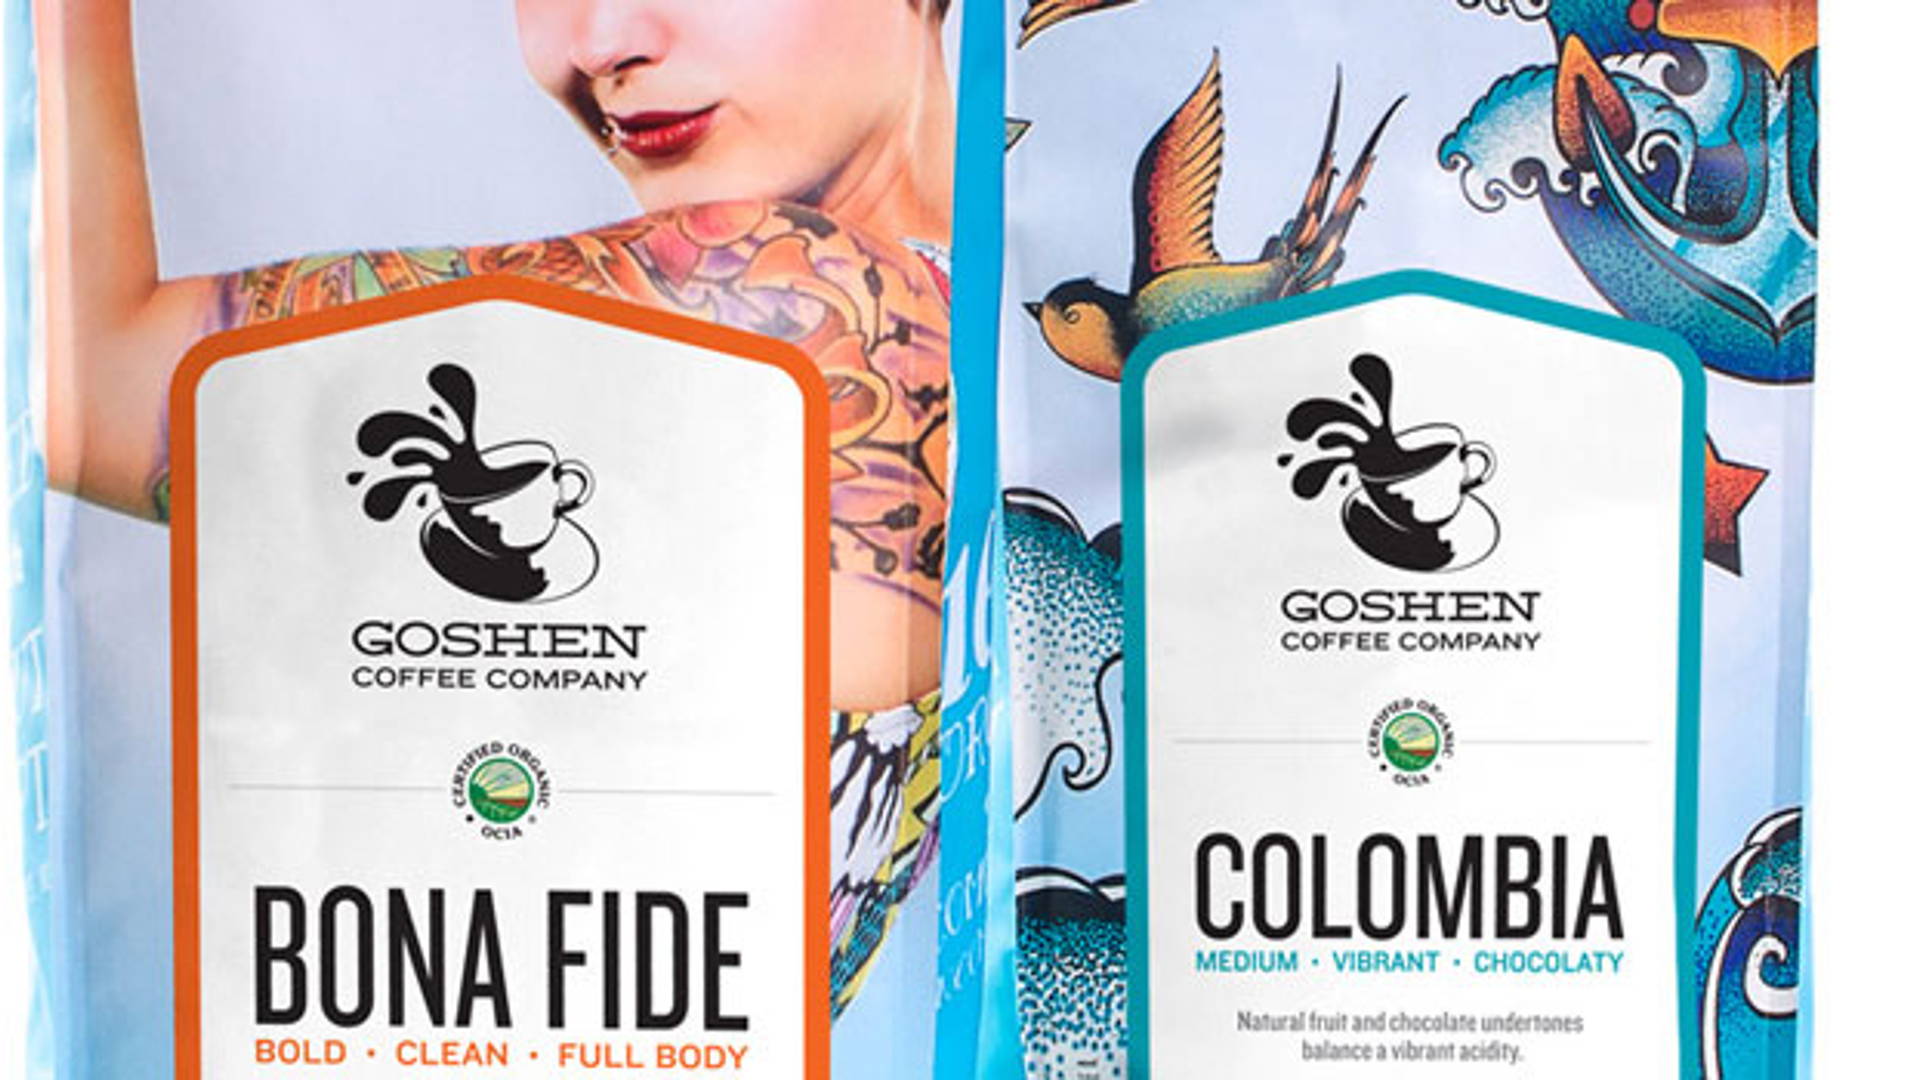 Featured image for Goshen Coffee Company